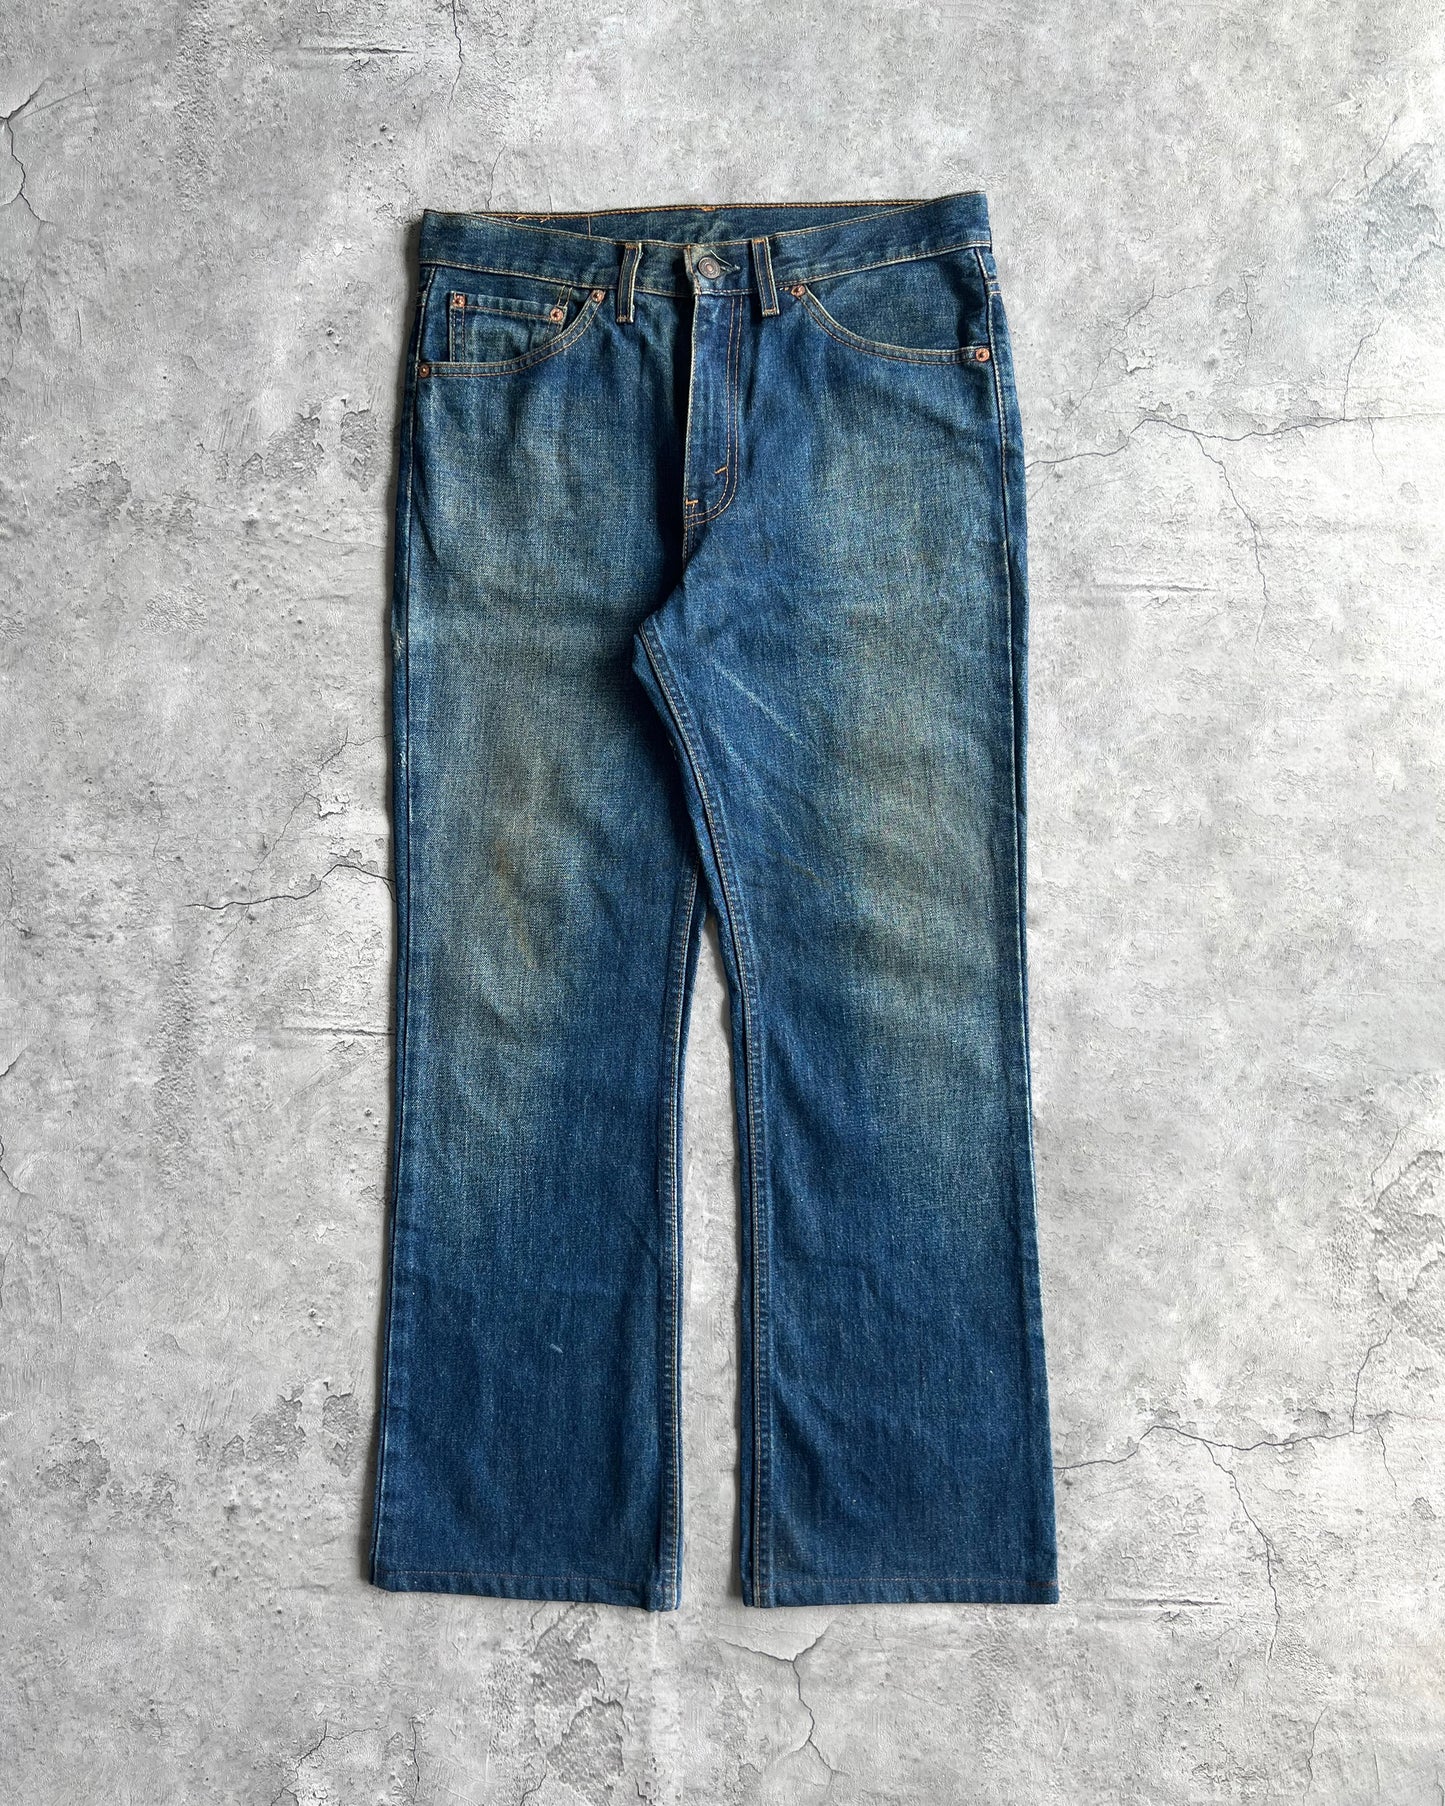 1990S DARK WASHED LEVI'S 517 BOOTCUT JEANS (33X34)